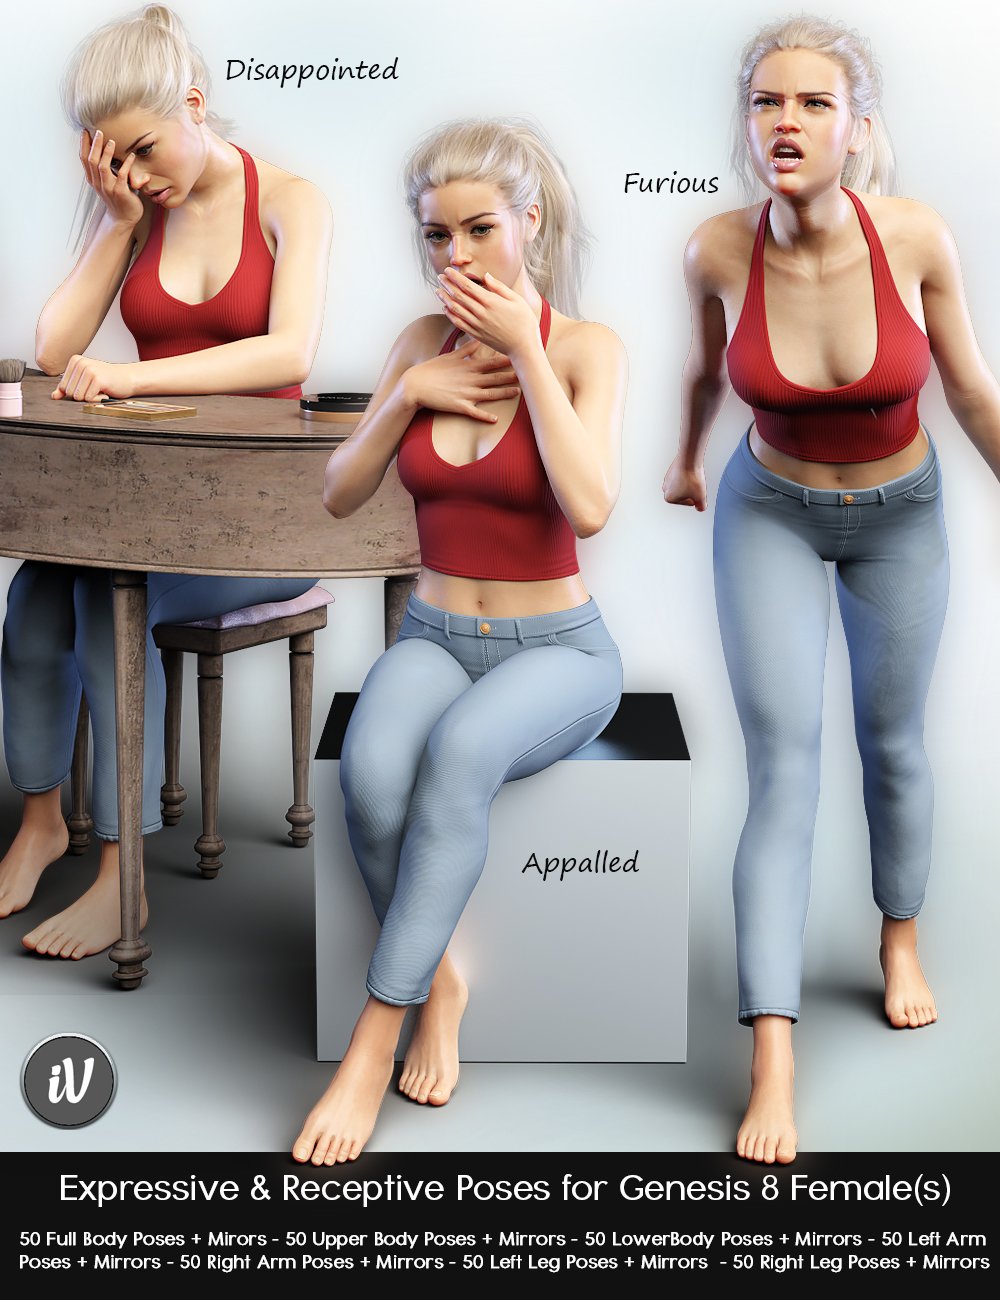 iV Expressive & Receptive Poses For Genesis 8 Female(s) by: i3D_LotusValery3D, 3D Models by Daz 3D